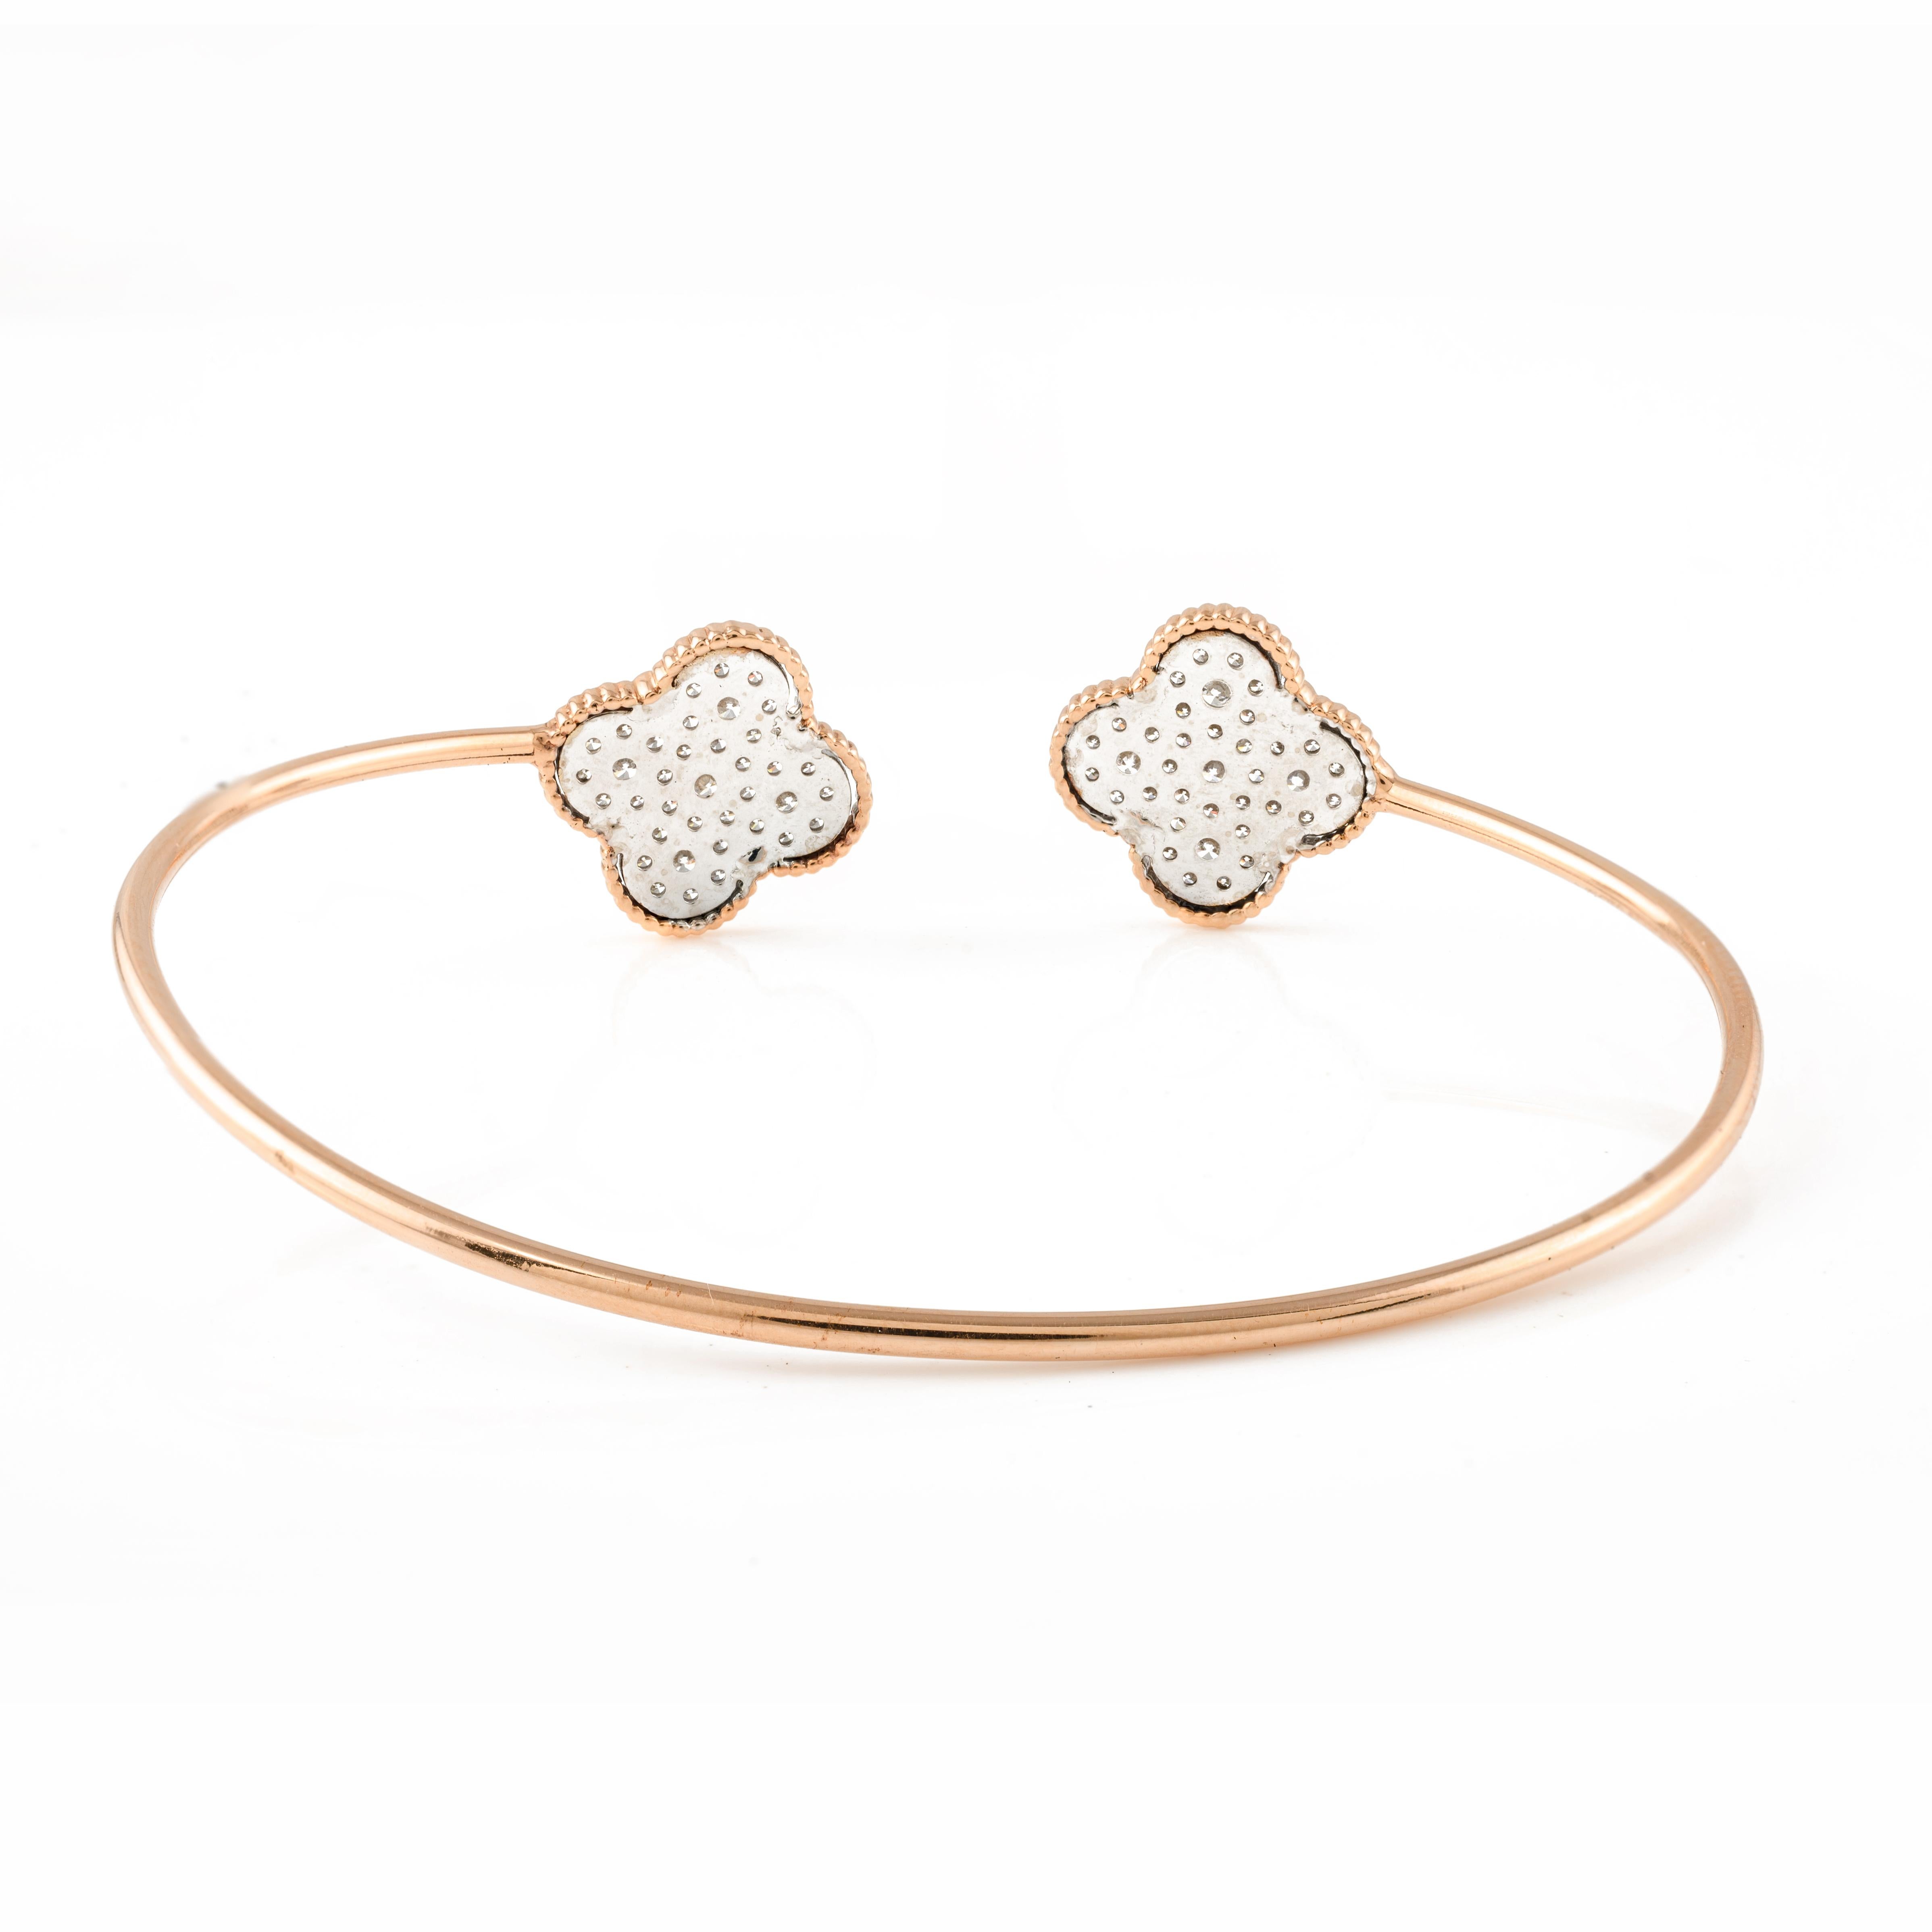 Clover Diamond Cuff Bracelet 18k Solid Rose Gold, Christmas Gift For Her In New Condition For Sale In Houston, TX